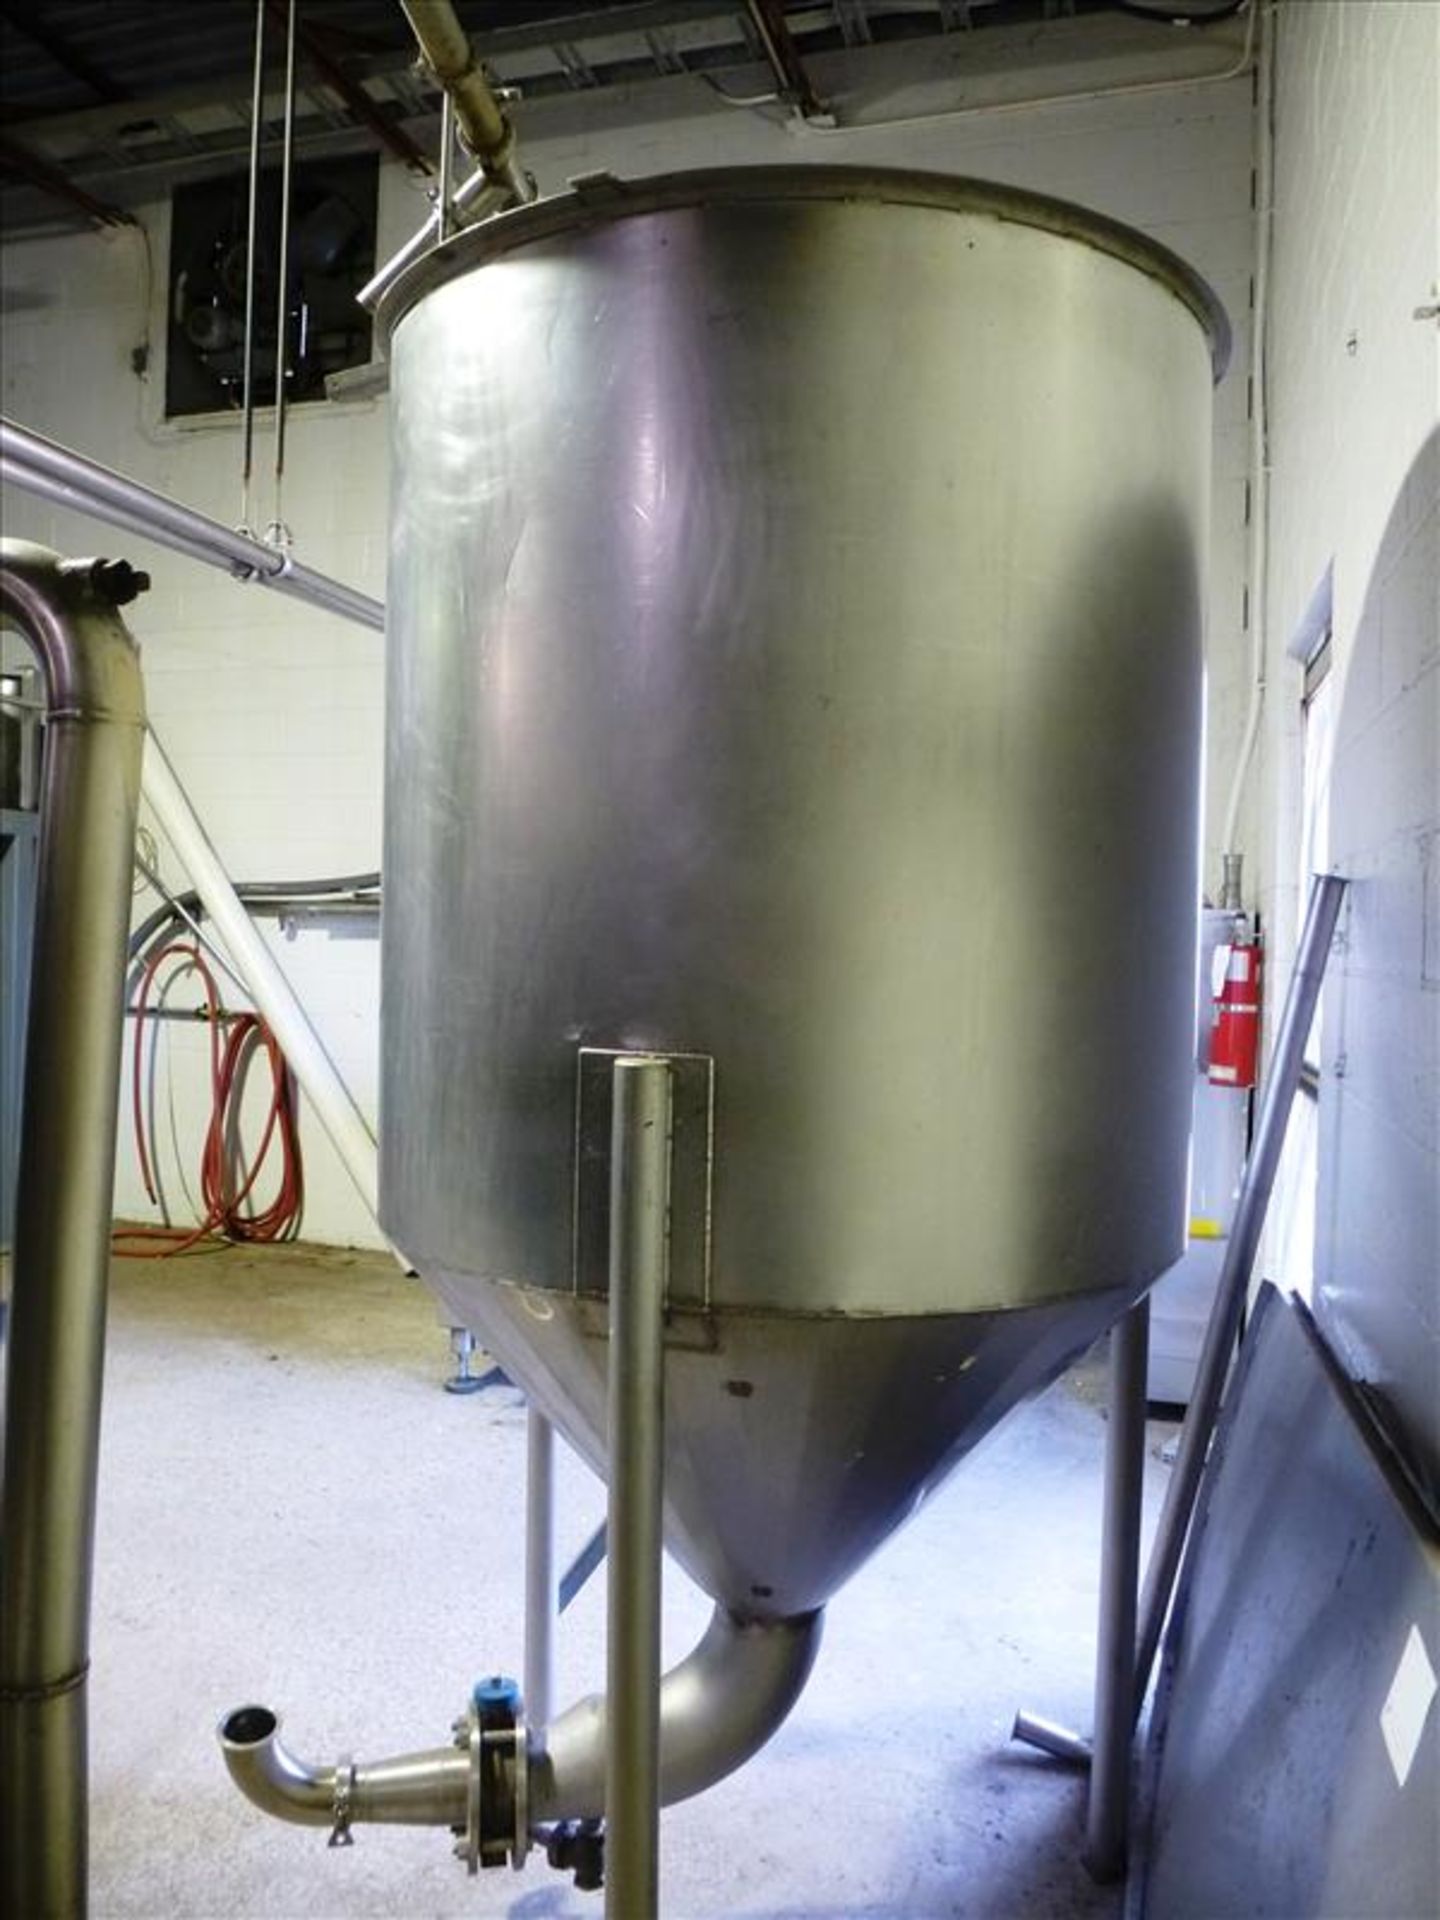 s/s sterilizer tank, approx. 48" diam. x 48" high straight side c/w cone bottom & s/s legs. THE - Image 2 of 4